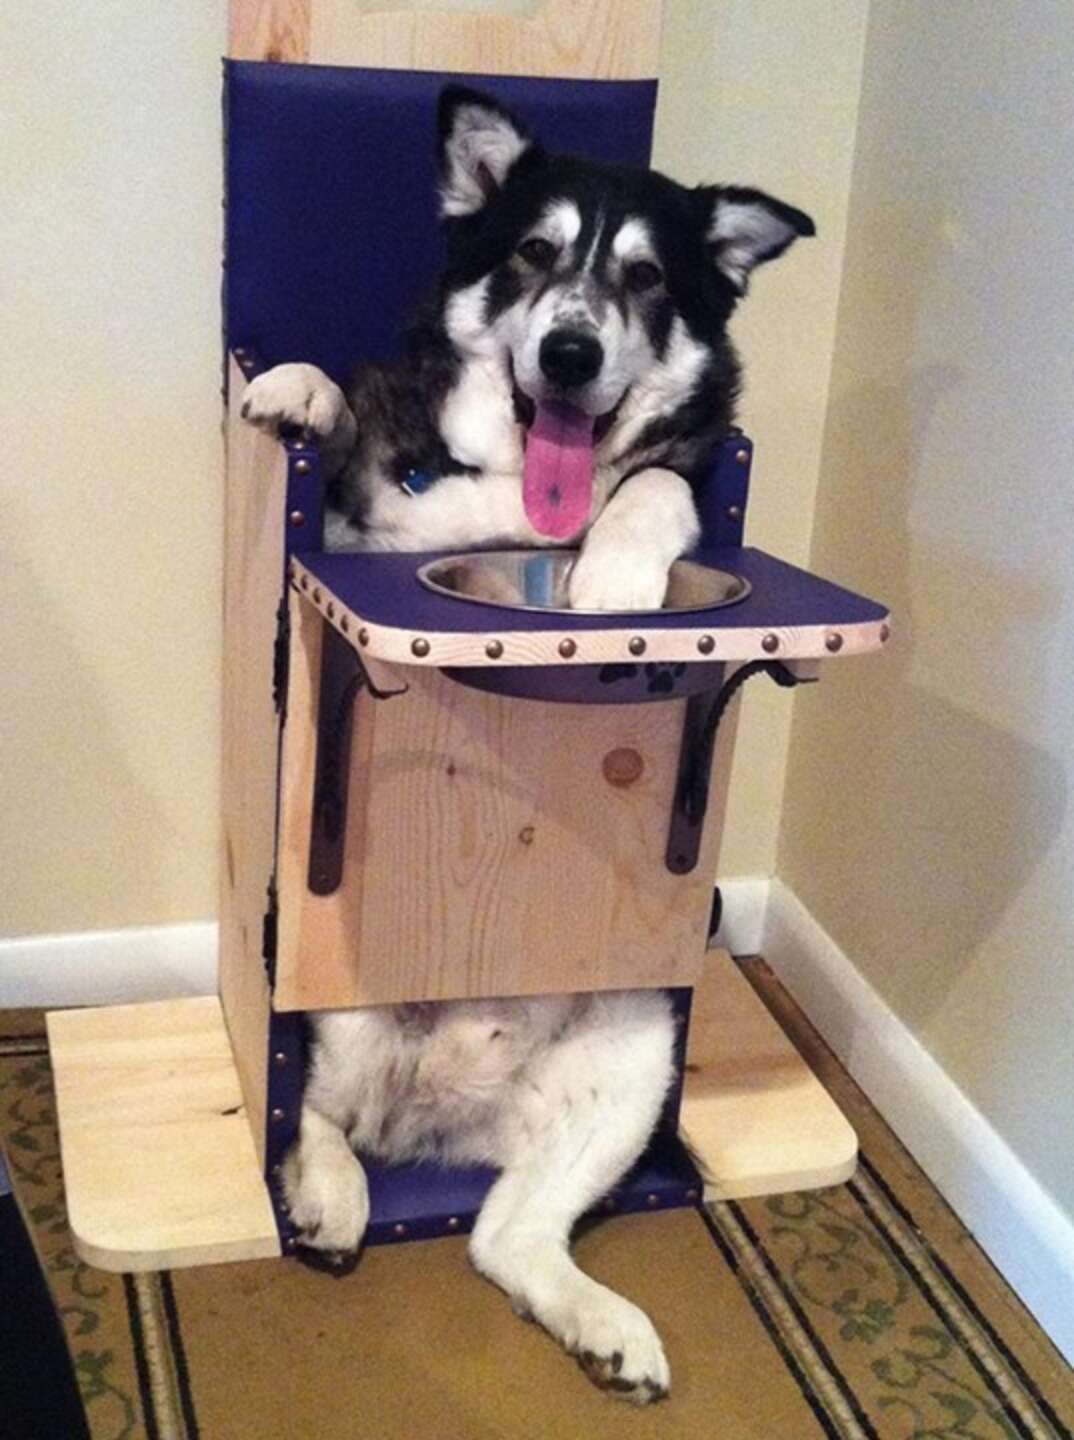 This Special Chair Is Saving The Lives Of Hundreds Of Dogs - The Dodo